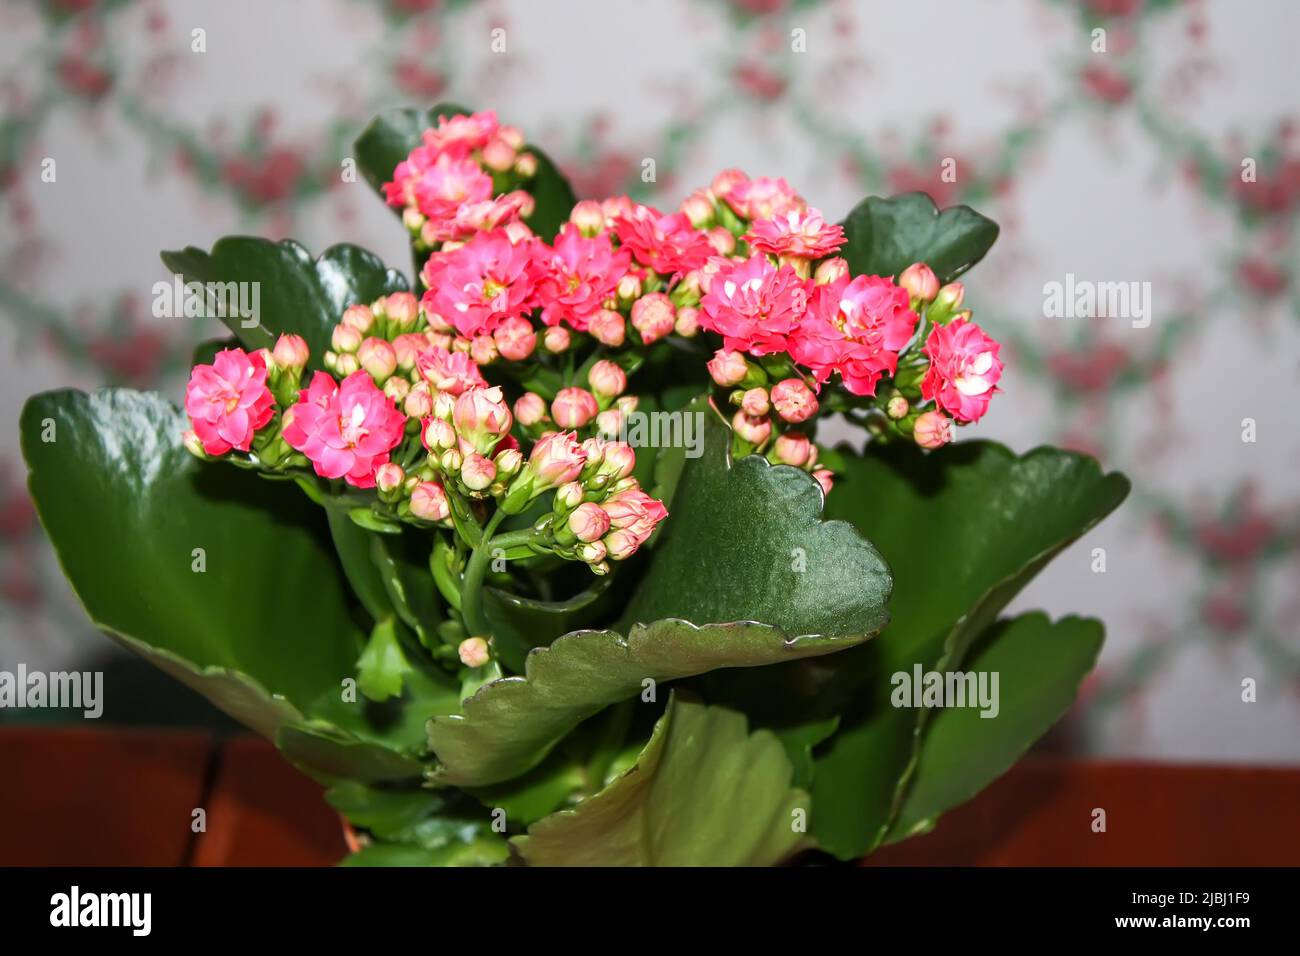 Chalanchoe Calandiva plant in bloom. House plants in floral pot Stock Photo